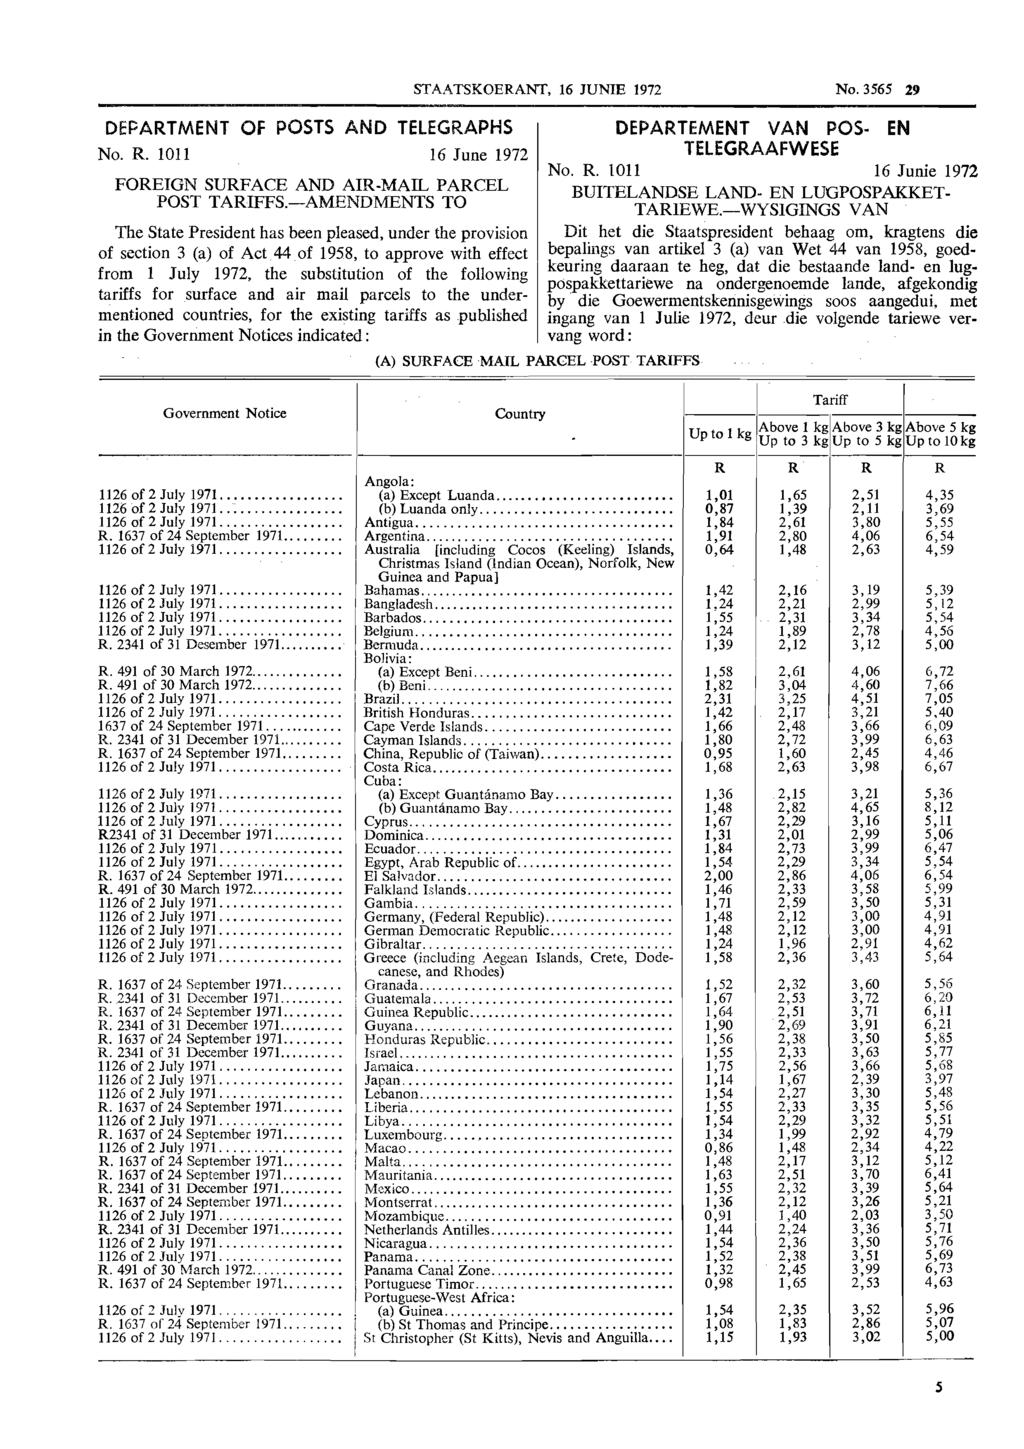 DEPARTMENT OF POSTS AND TELEGRAPHS No. R. IOIl 16 June 1972 FOREIGN SURFACE AND AIR-MAIL PARCEL POST TARIFFS.